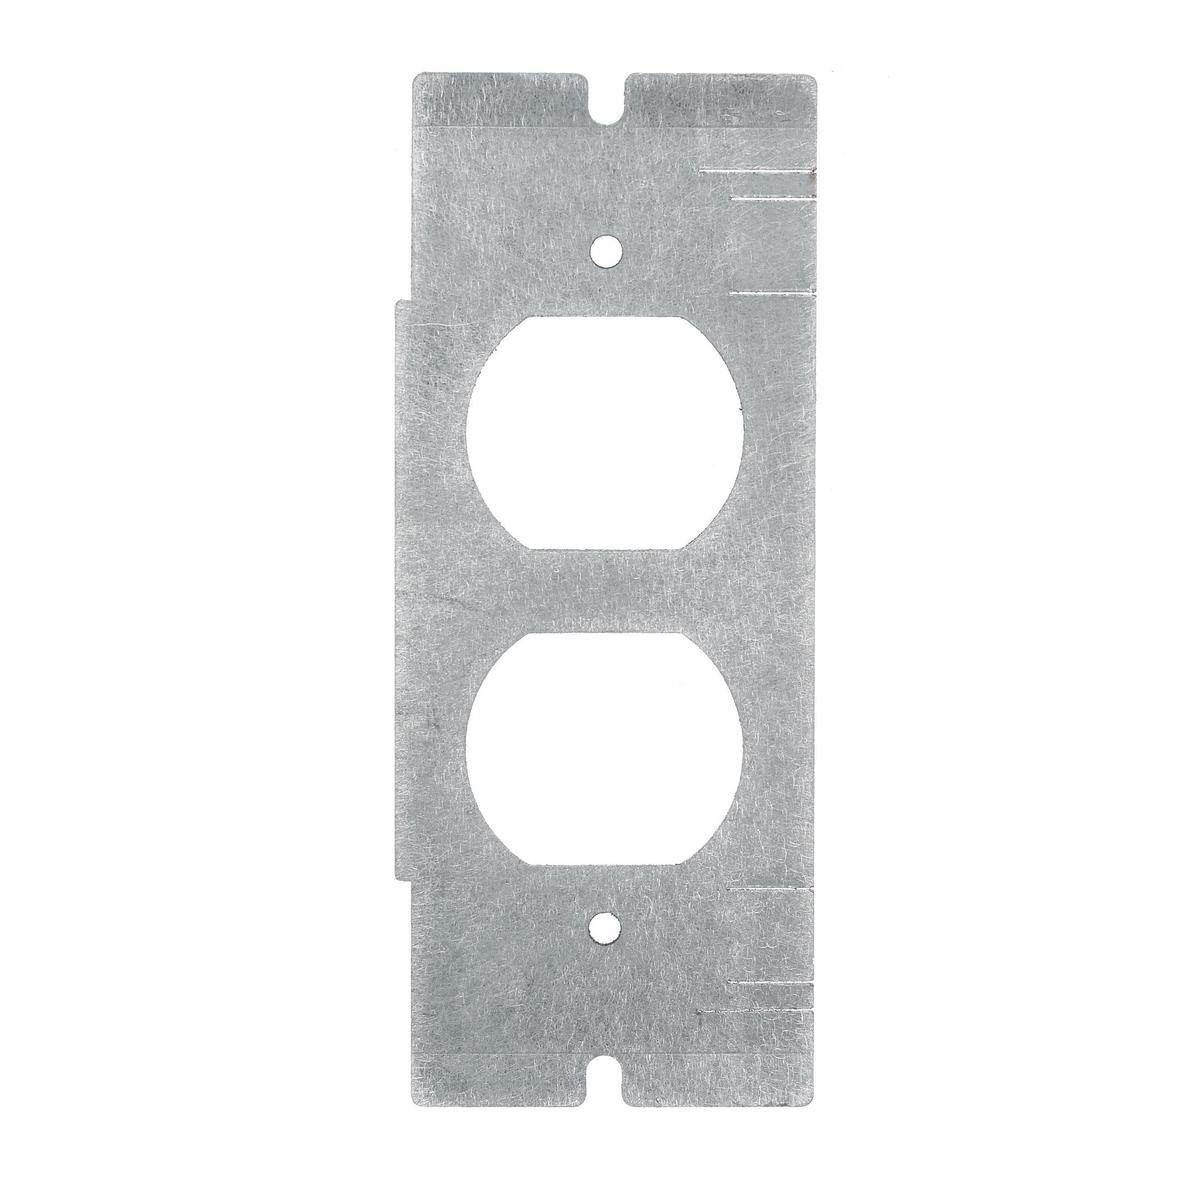 Hubbell FBMPDUP Concrete, Access, Wood Floorboxes, Recessed, 2, 4, & 6-Gang Series, Mounting Plate, 1-Gang, (1) Duplex Opening  ; Plate for Use in SystemOne 2, 4 & 6-Gang Recessed Floorboxes ; 1-Gang- Duplex Opening ; Horizontial 1-Gang Sub-Plate with (1) Duplex Opening